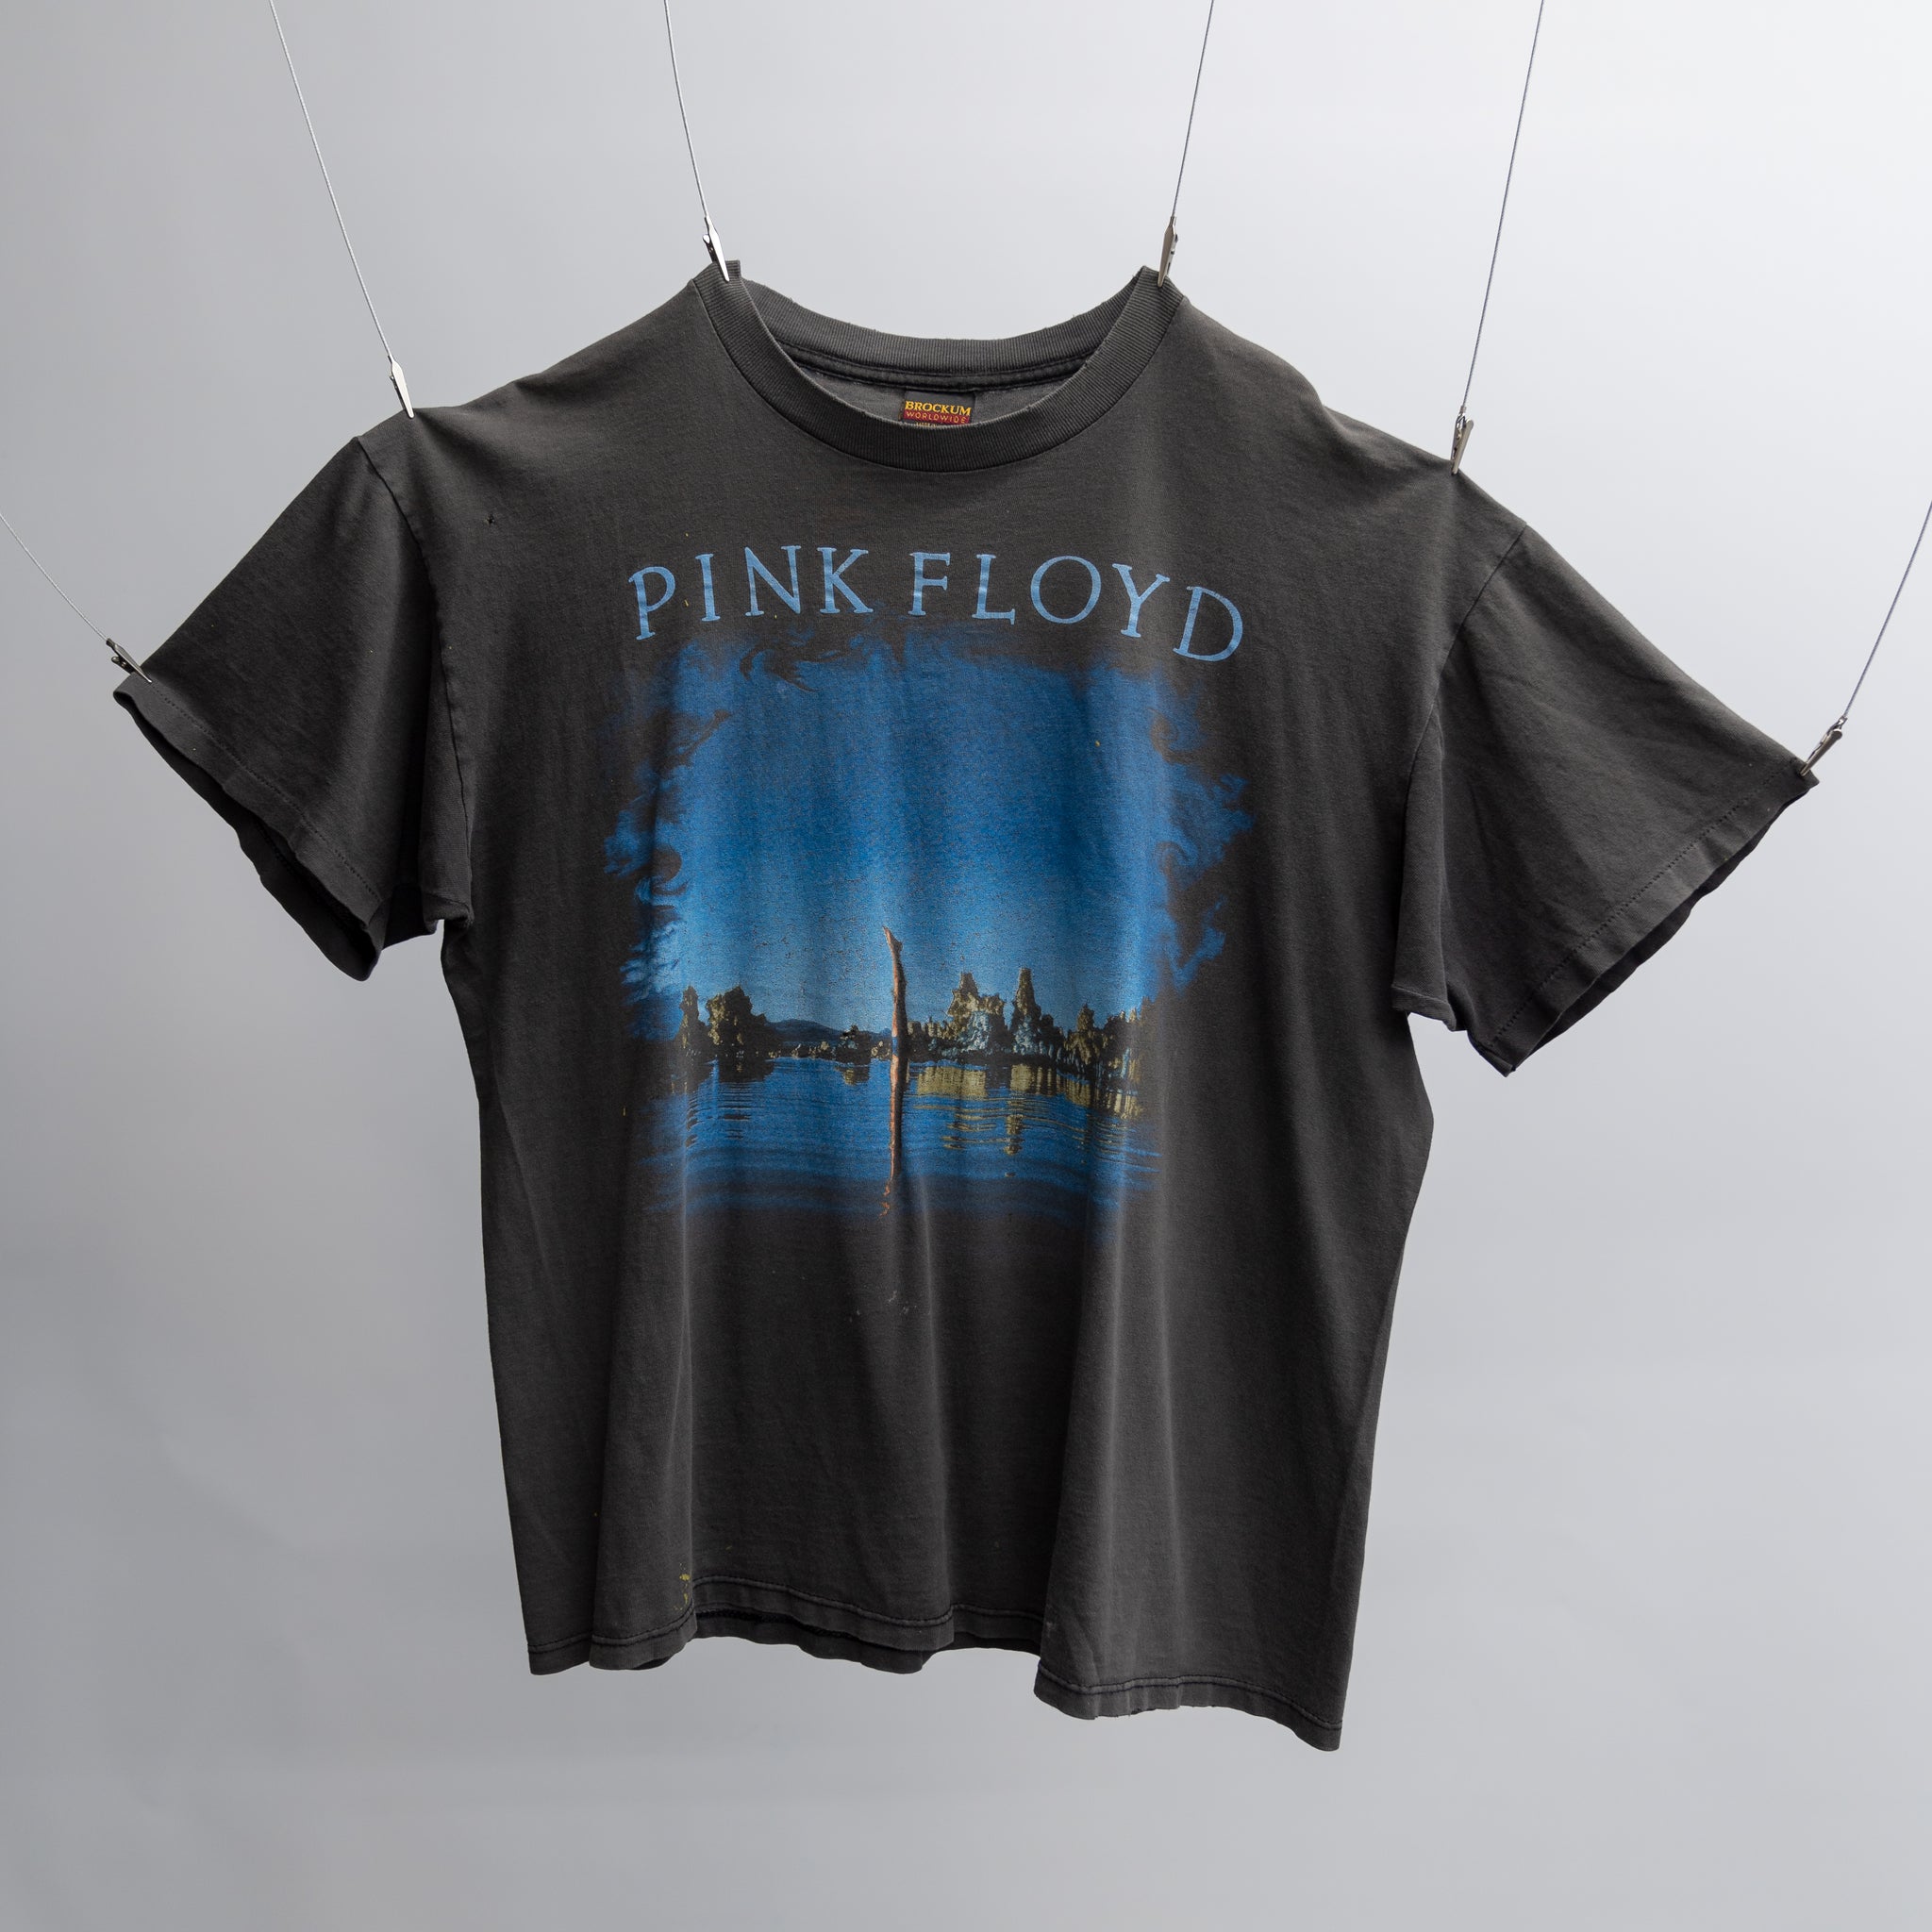 FADED SINGLE STITCH PINK FLOYD 'WISH YOU WERE HERE' TEE - 1990'S